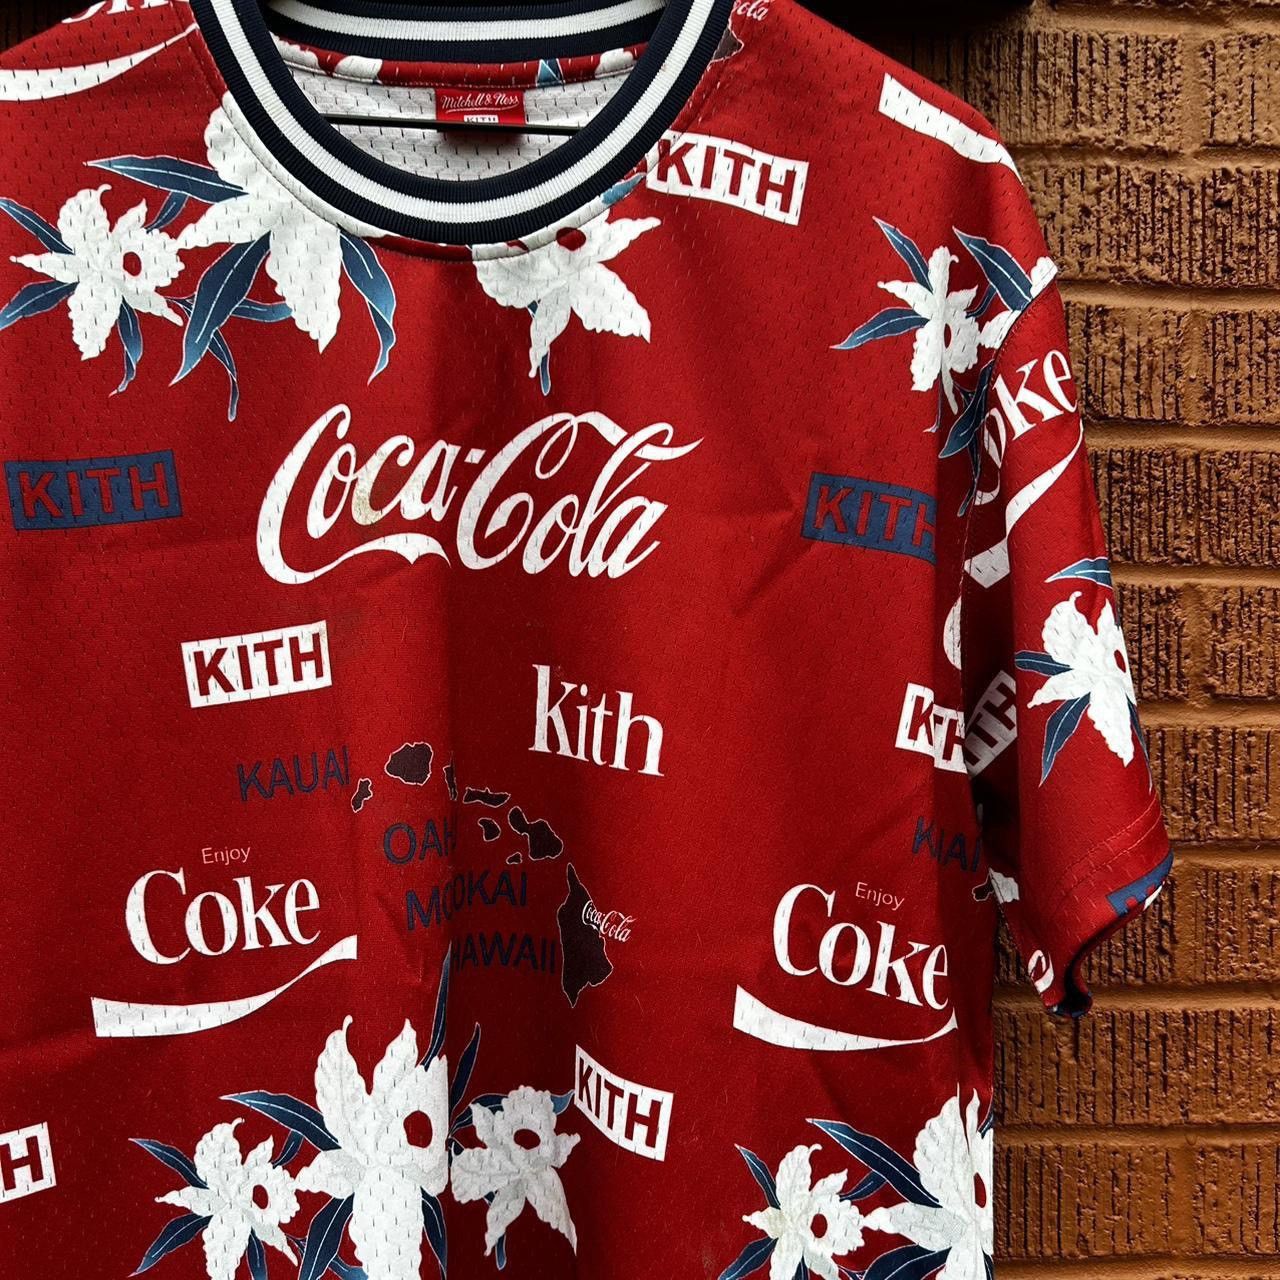 Kith Kith X Mitchell N Ness Coca Cola Jersey Shirt | Grailed